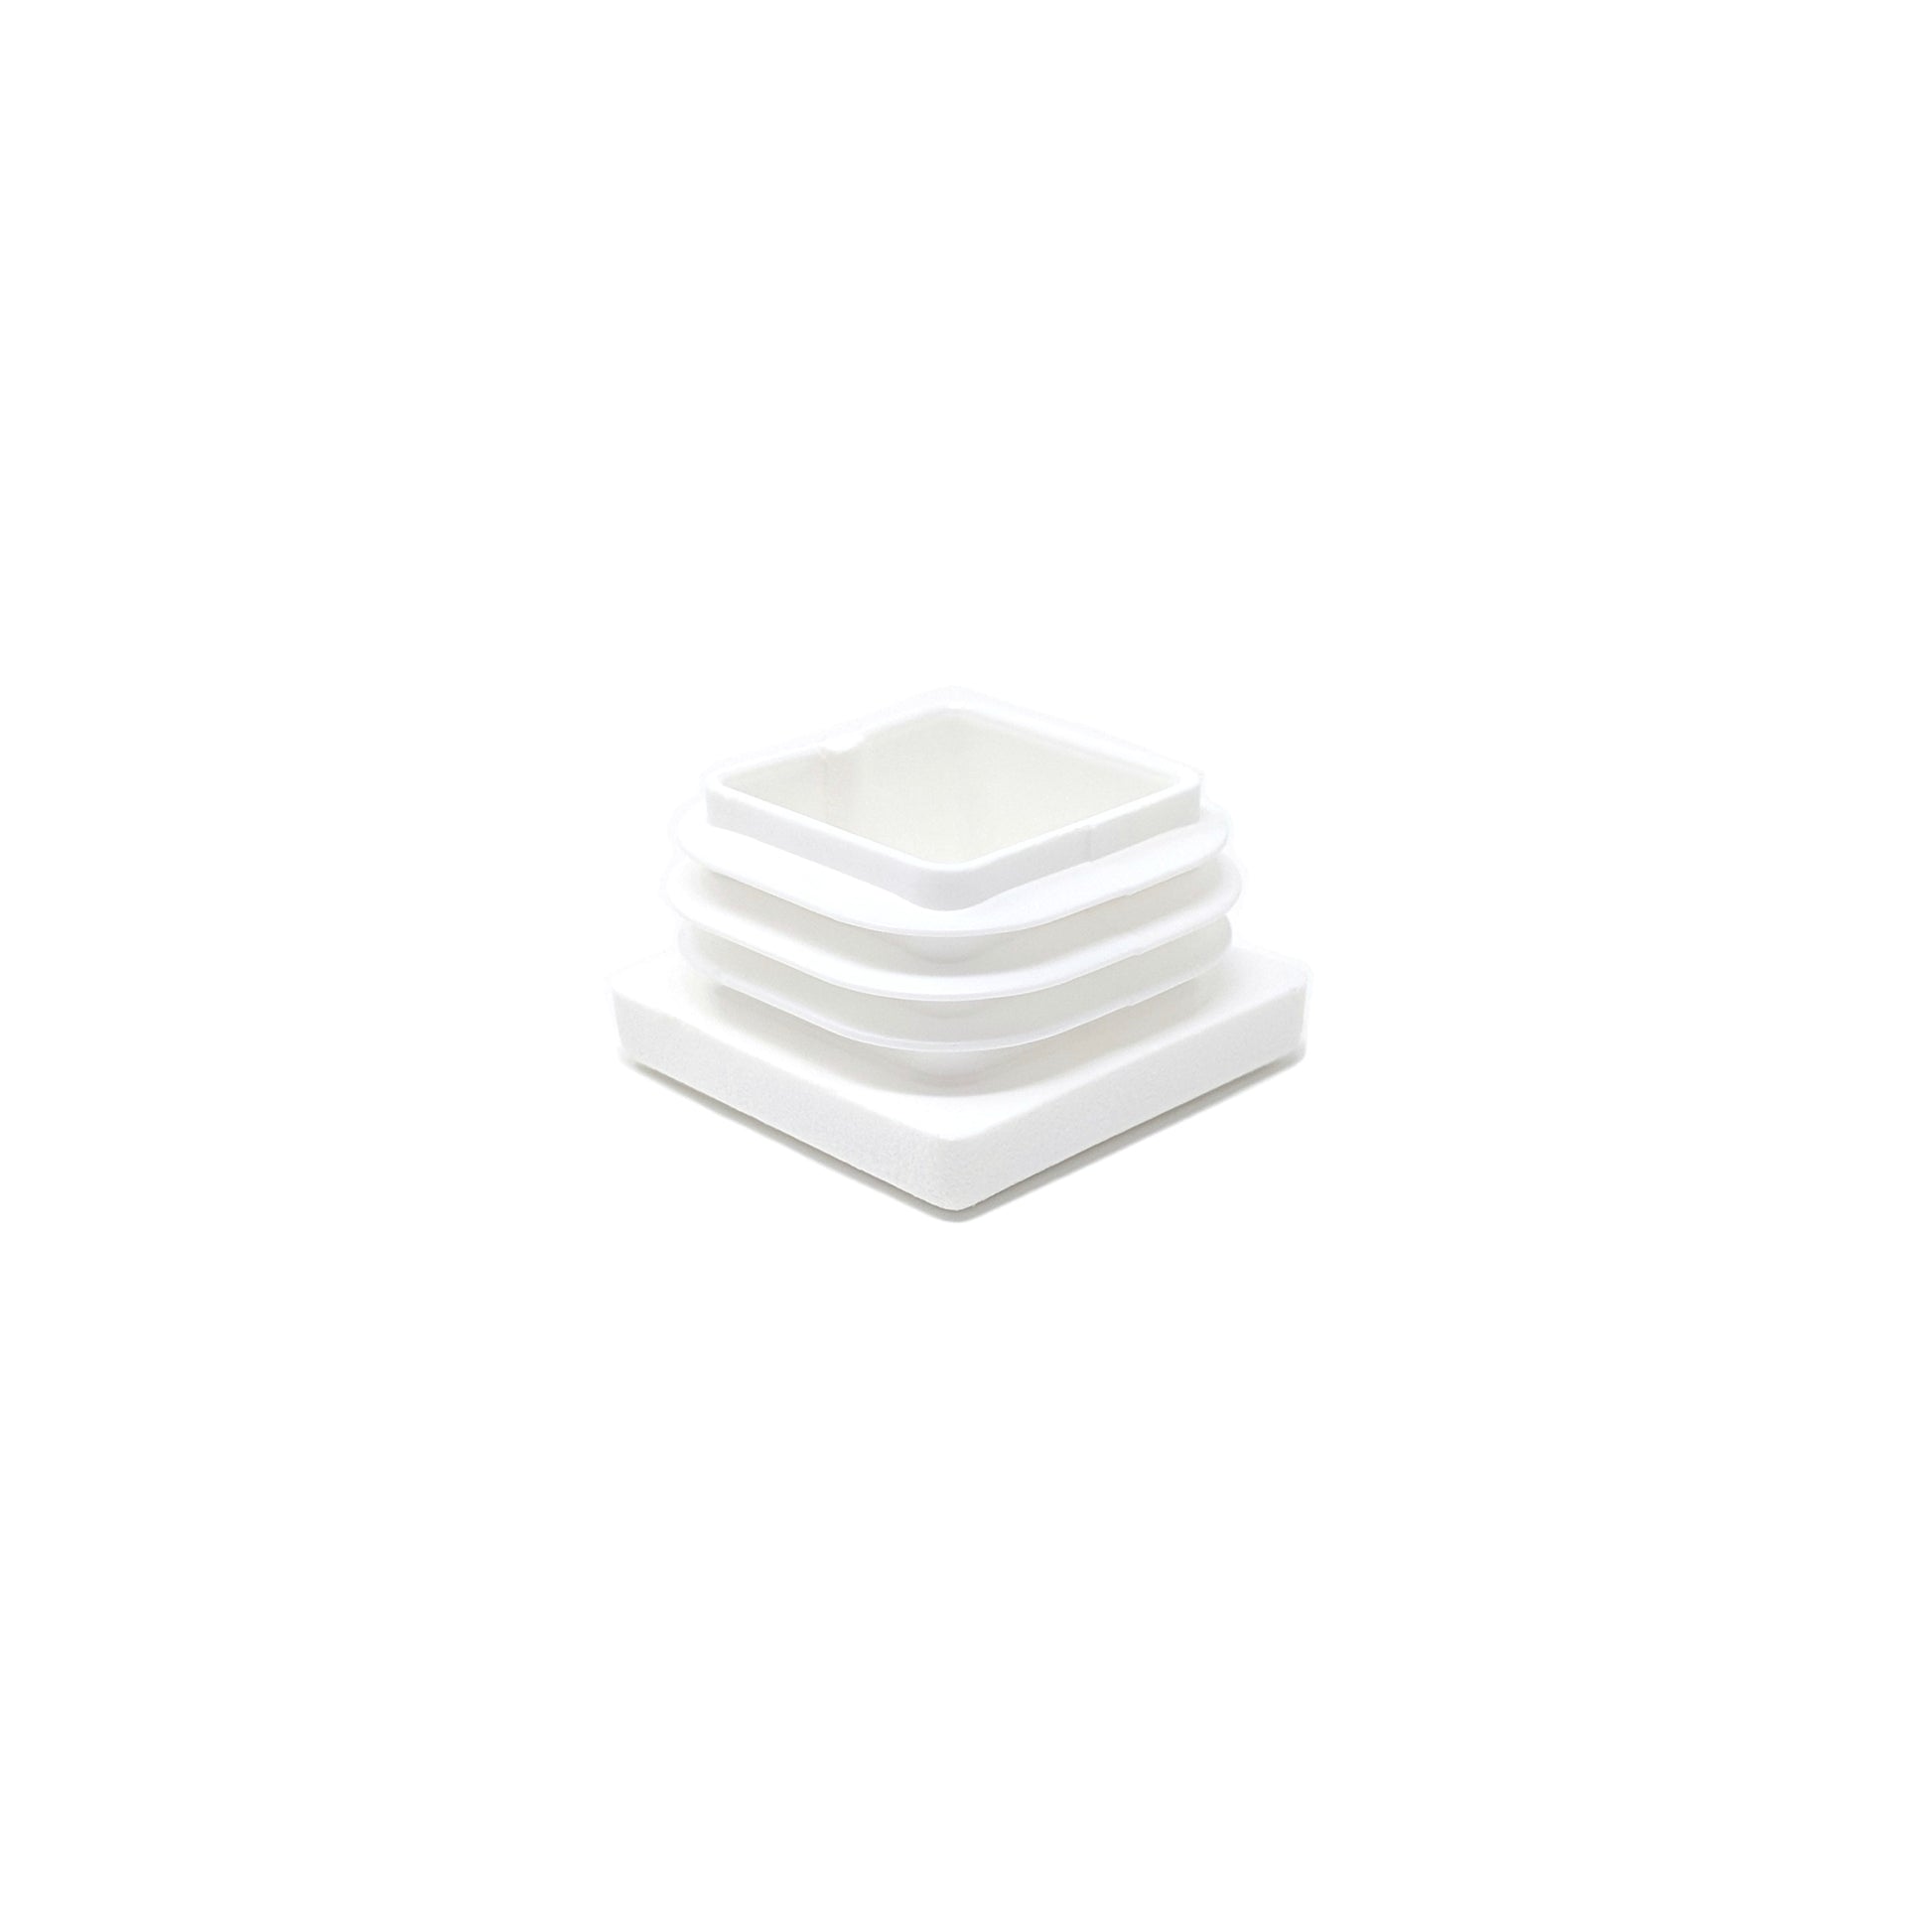 Square Tube Inserts 28mm x 28mm White | Made in Germany | Keay Vital Parts - Keay Vital Parts